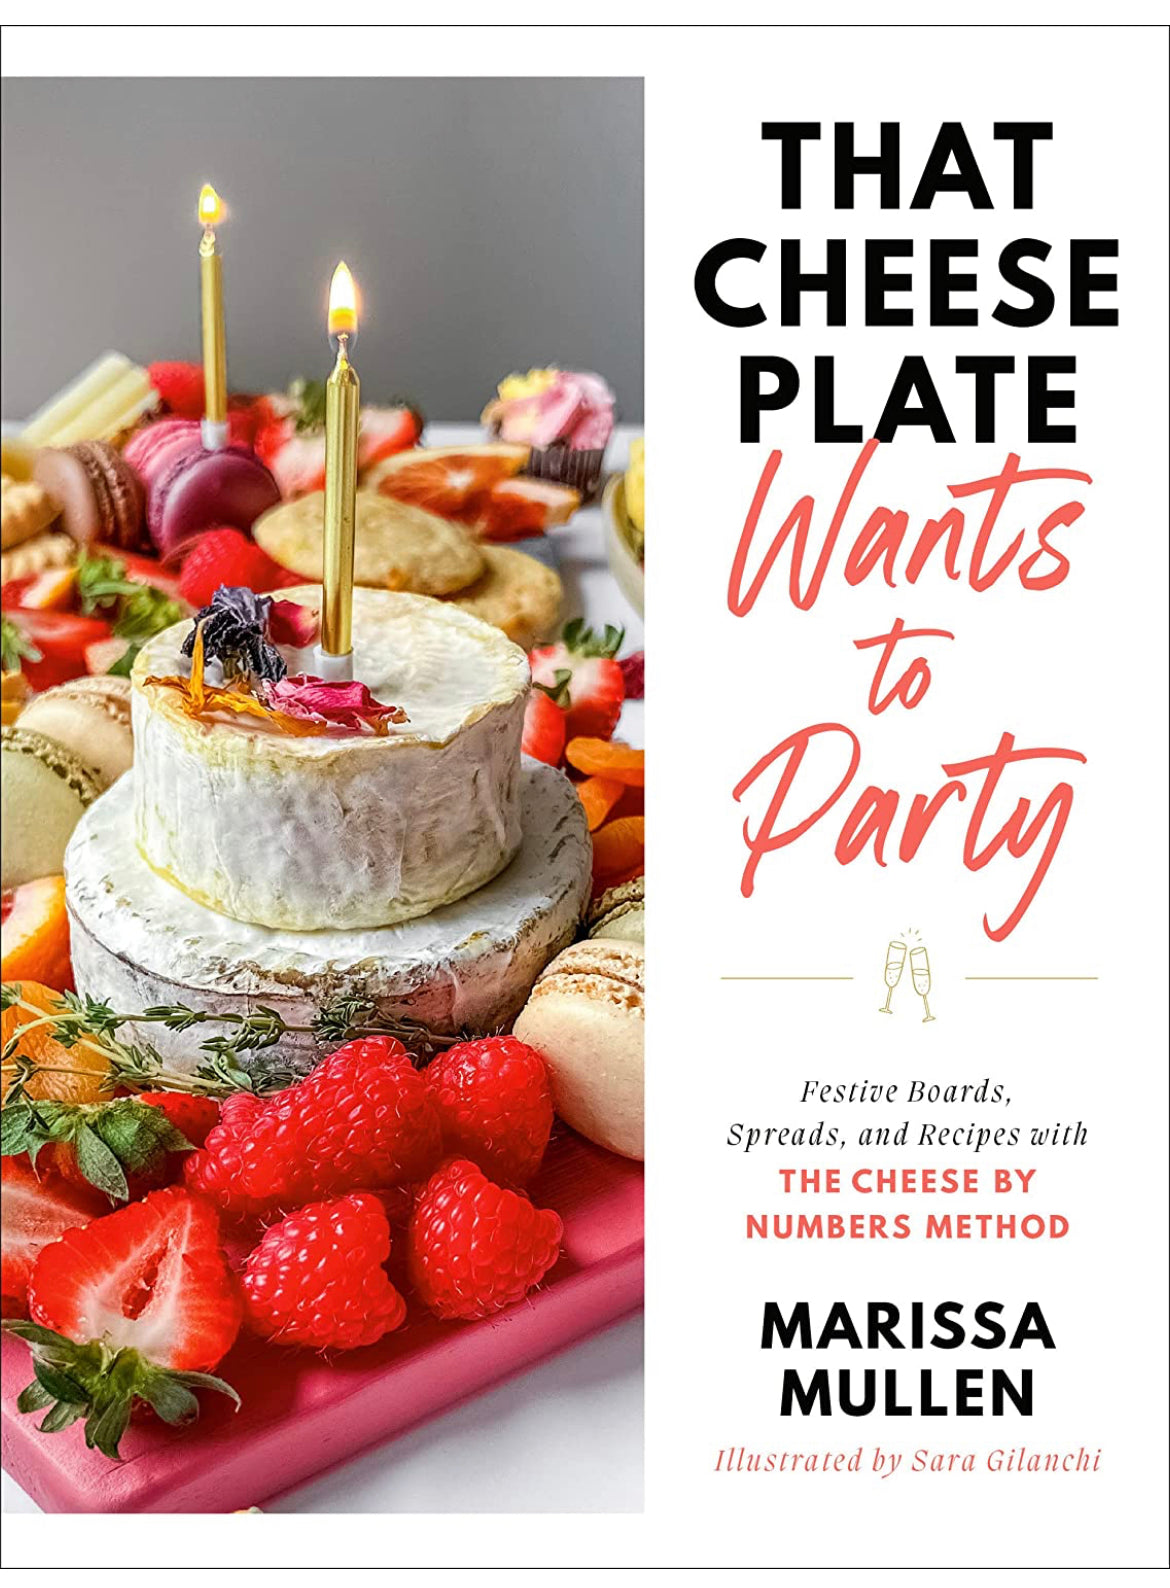 The Cheese Plate that Wants to Party